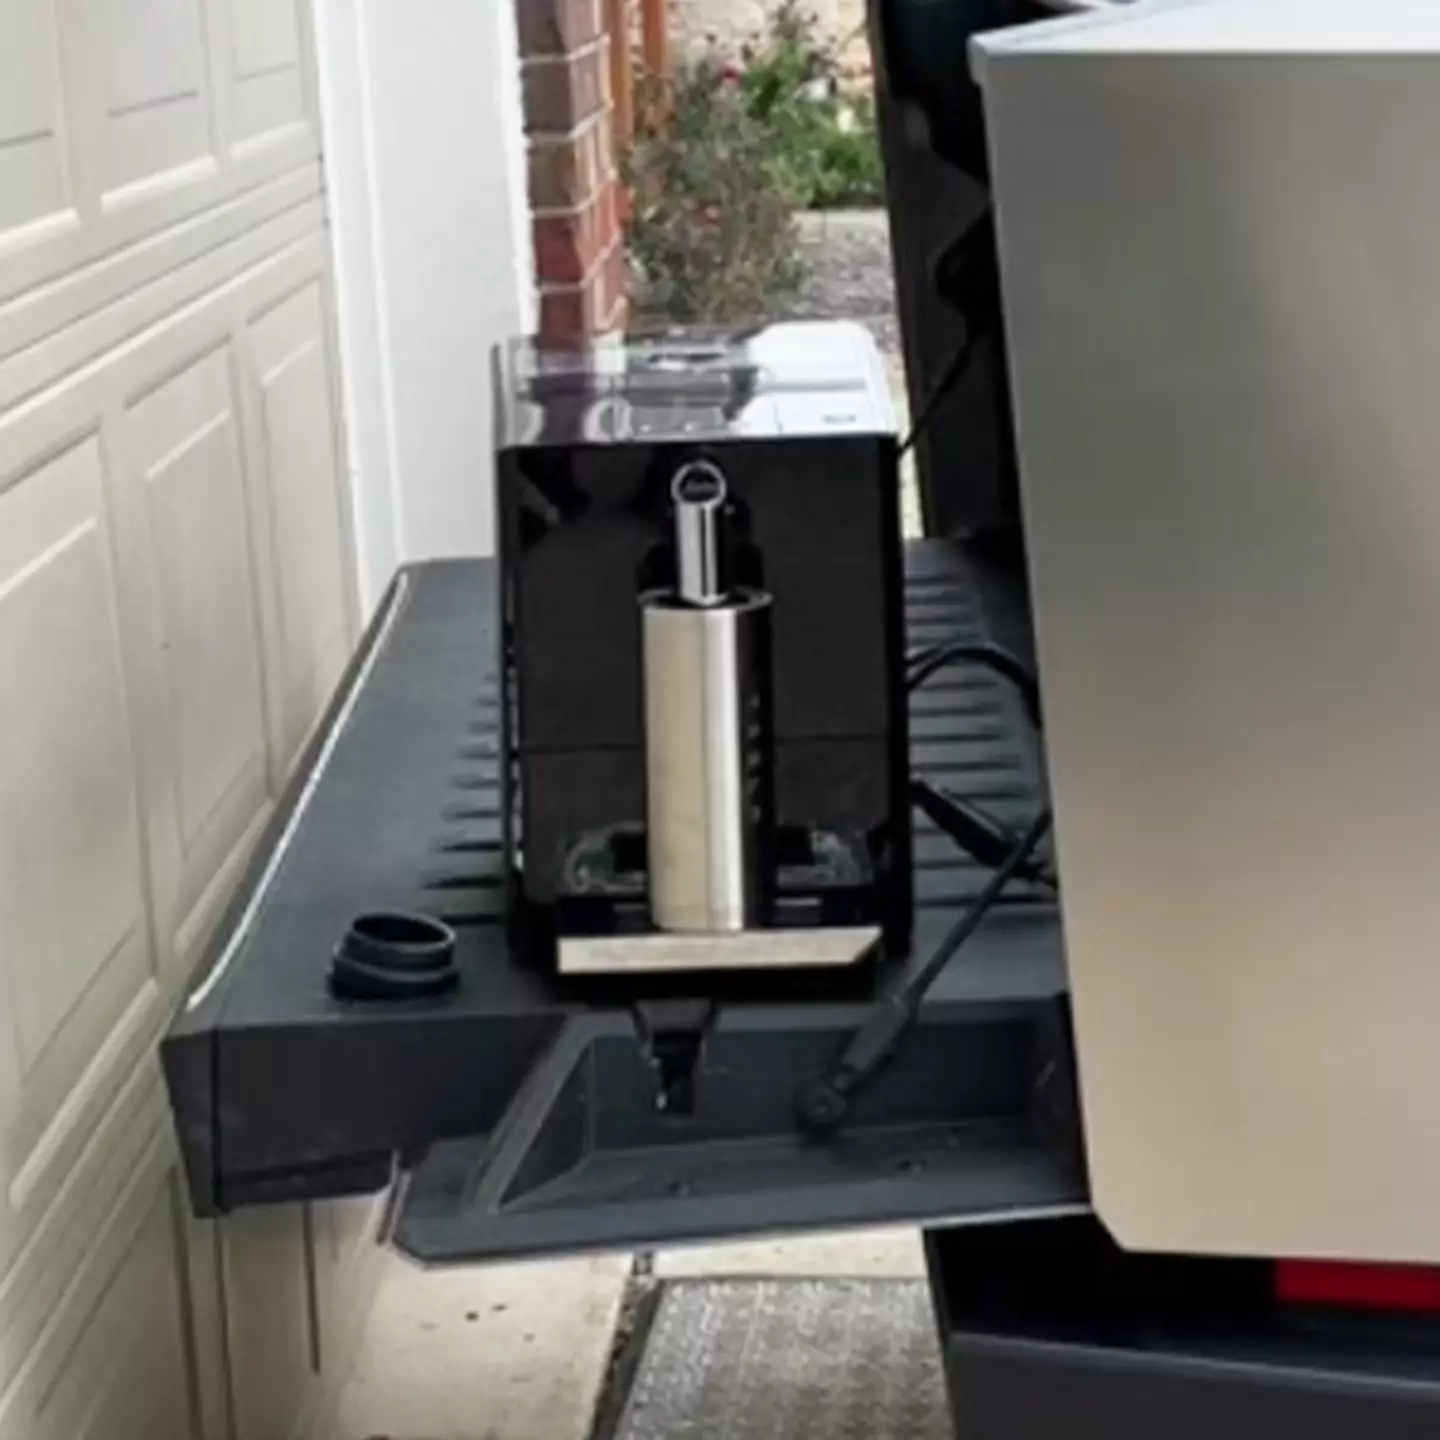 Cybertruck owner uses vehicle to work their coffee machine after freezing temperatures cause power outage in home